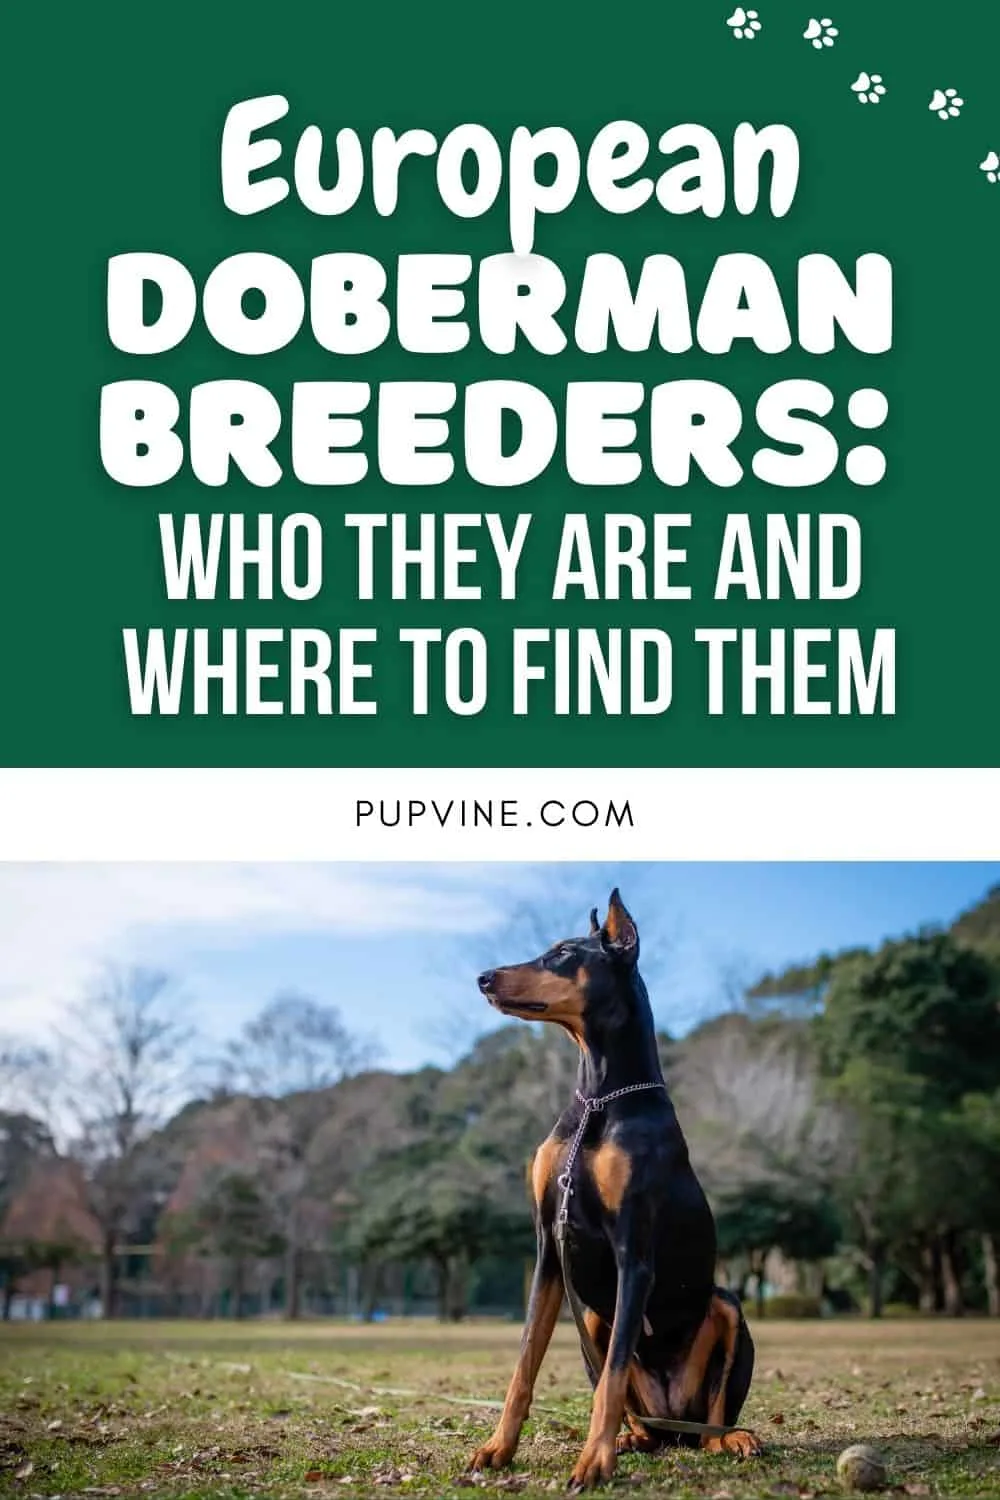 European Doberman Breeders: Who They Are And Where To Find Them